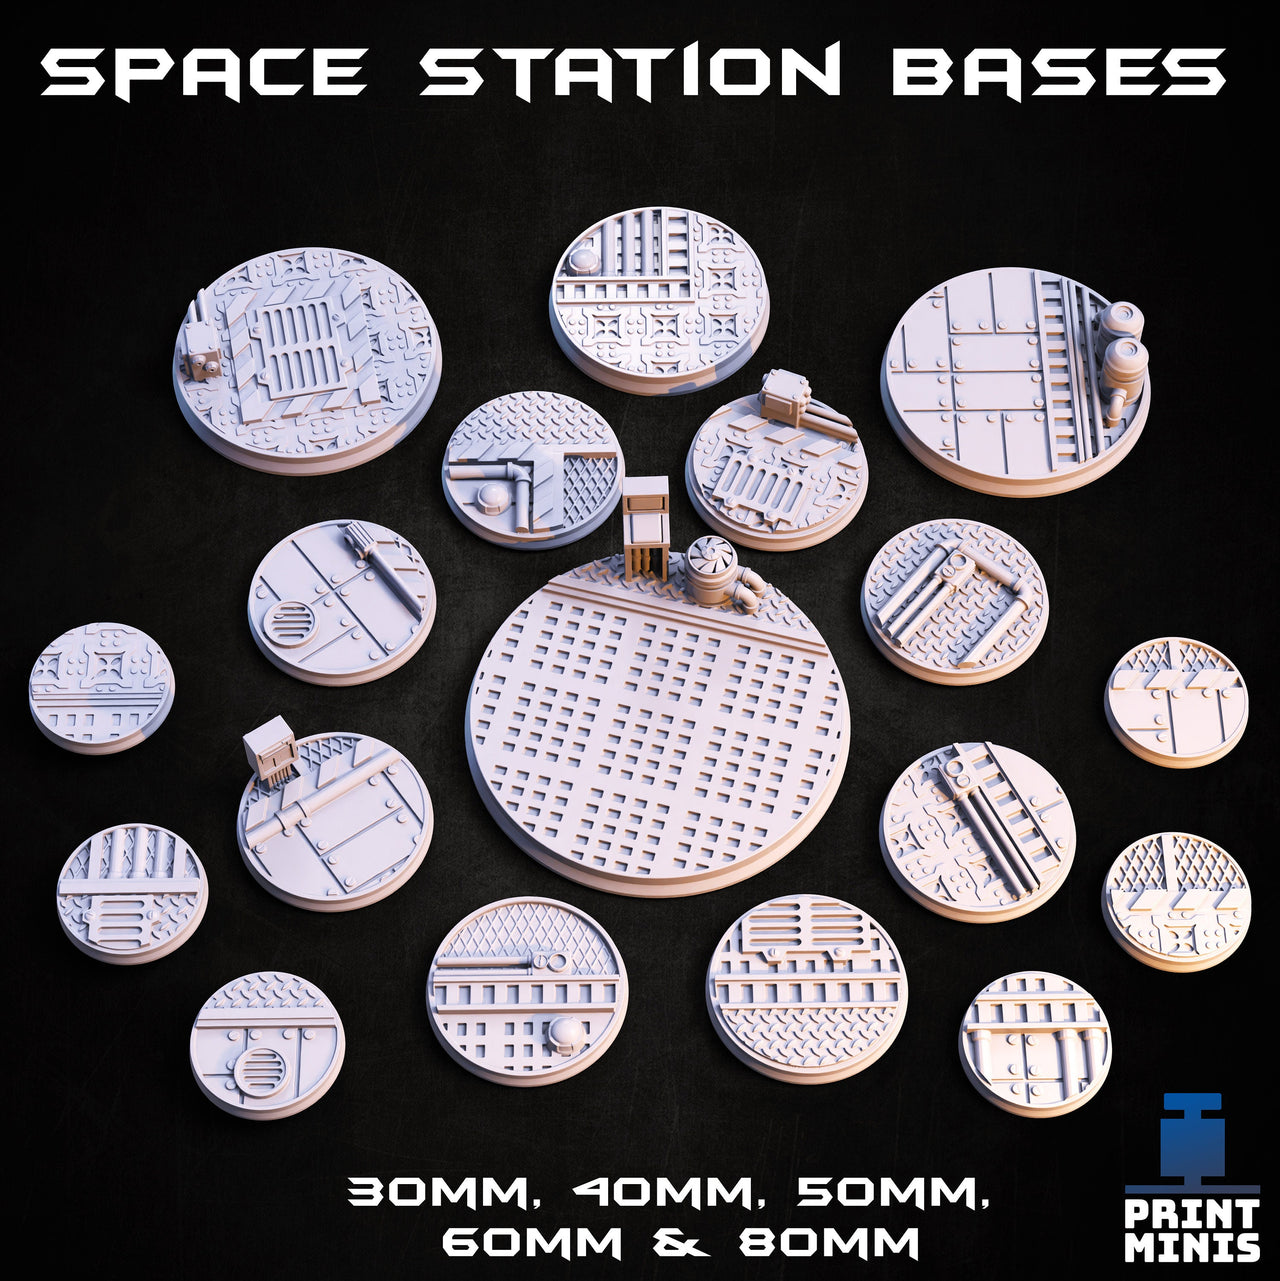 Space Station Bases - Print Minis 